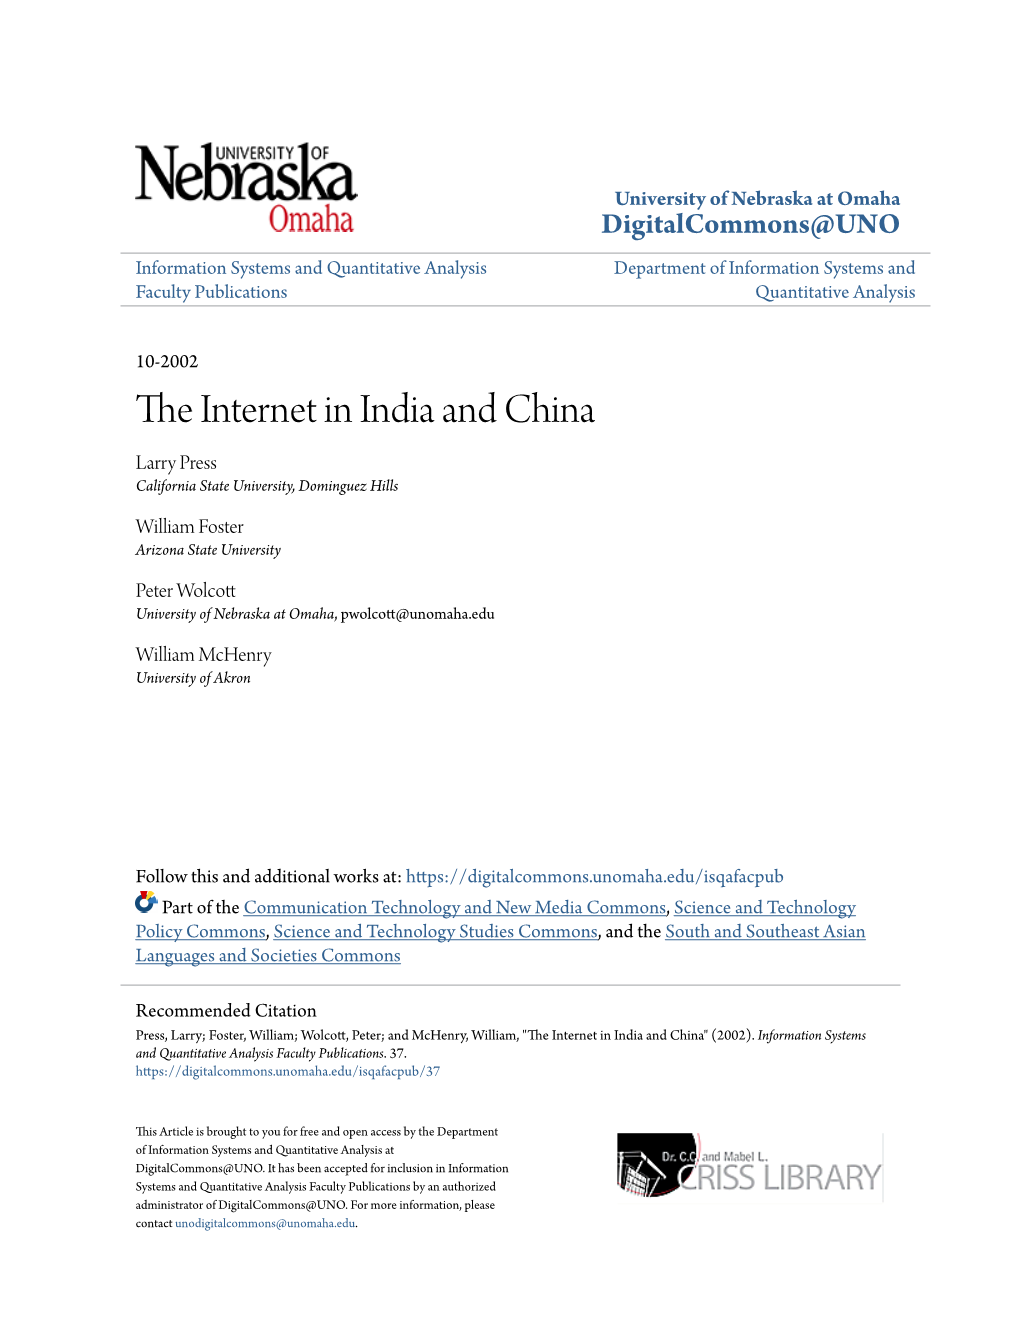 The Internet in India and China,” INET ’99, San Jose, Calif., June, 1999, At